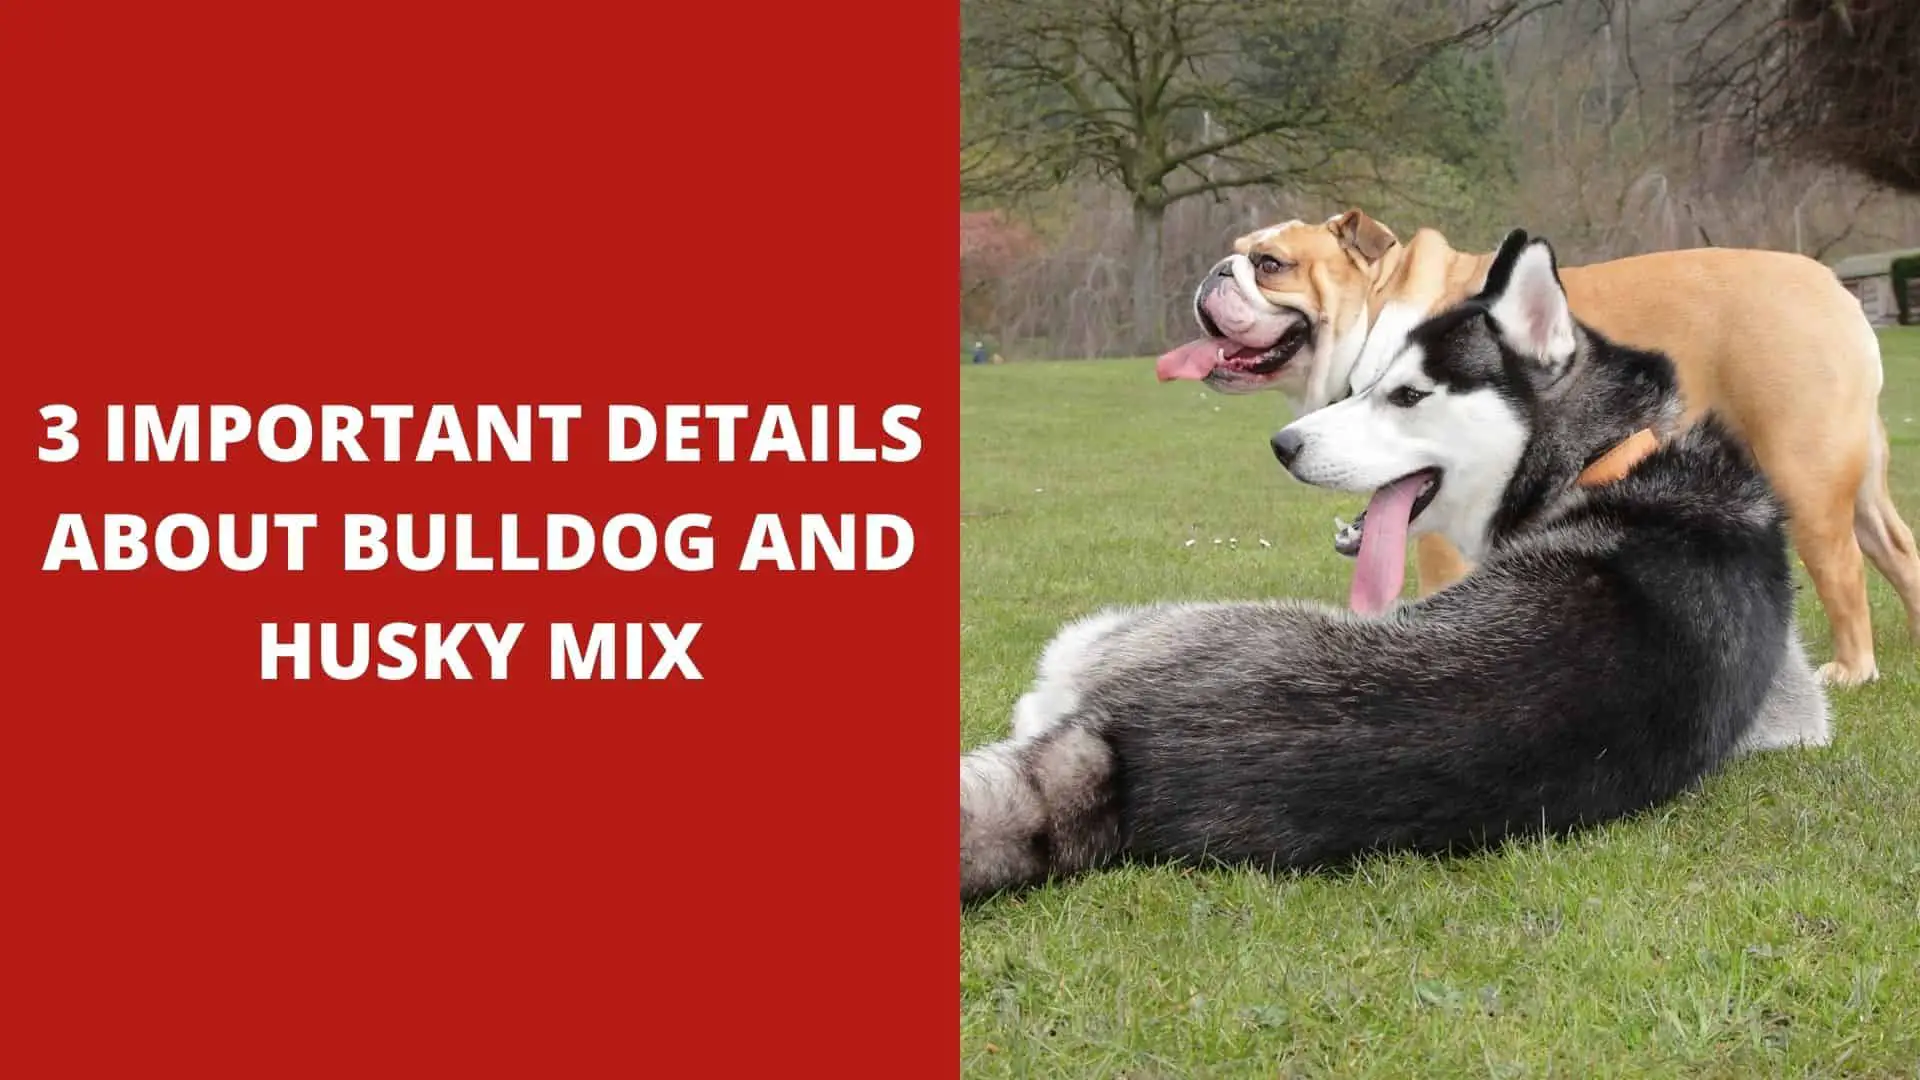 3 Important Details About Bulldog and Husky Mix